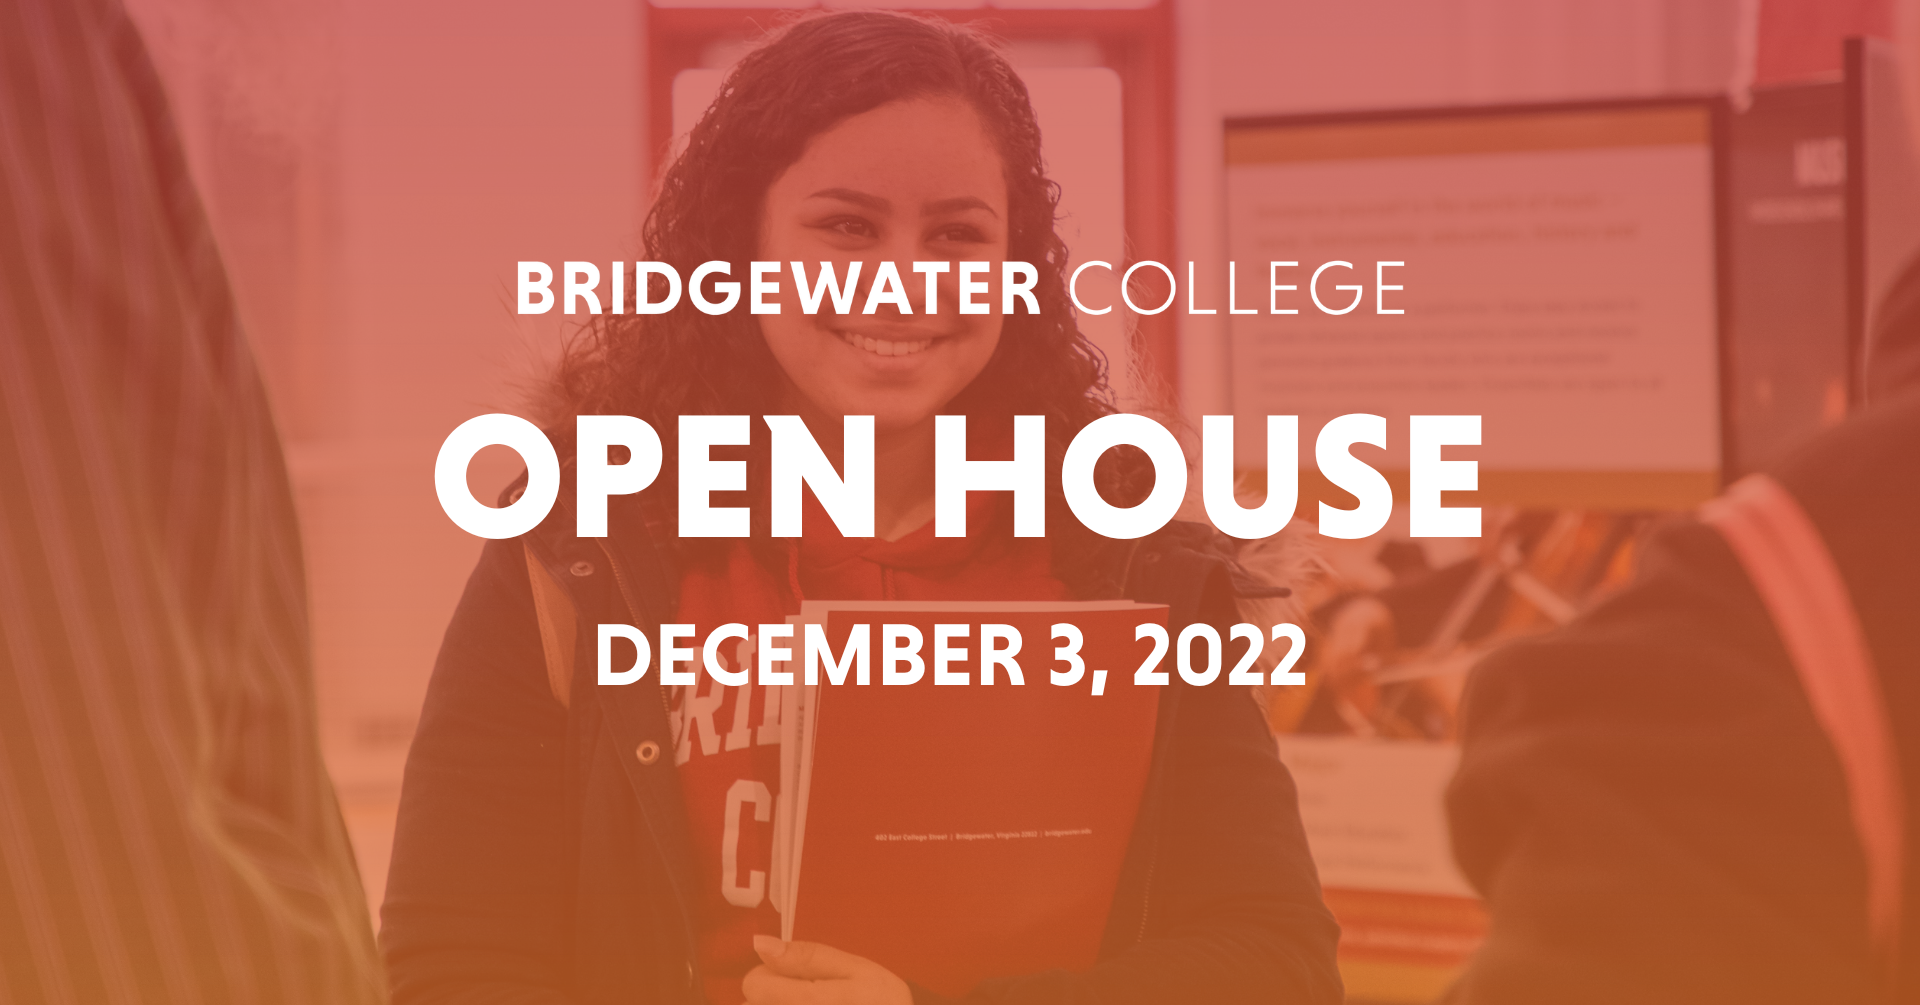 Bridgewater College Open House December 3, 2022 Student smiling in the background with transparent overlay